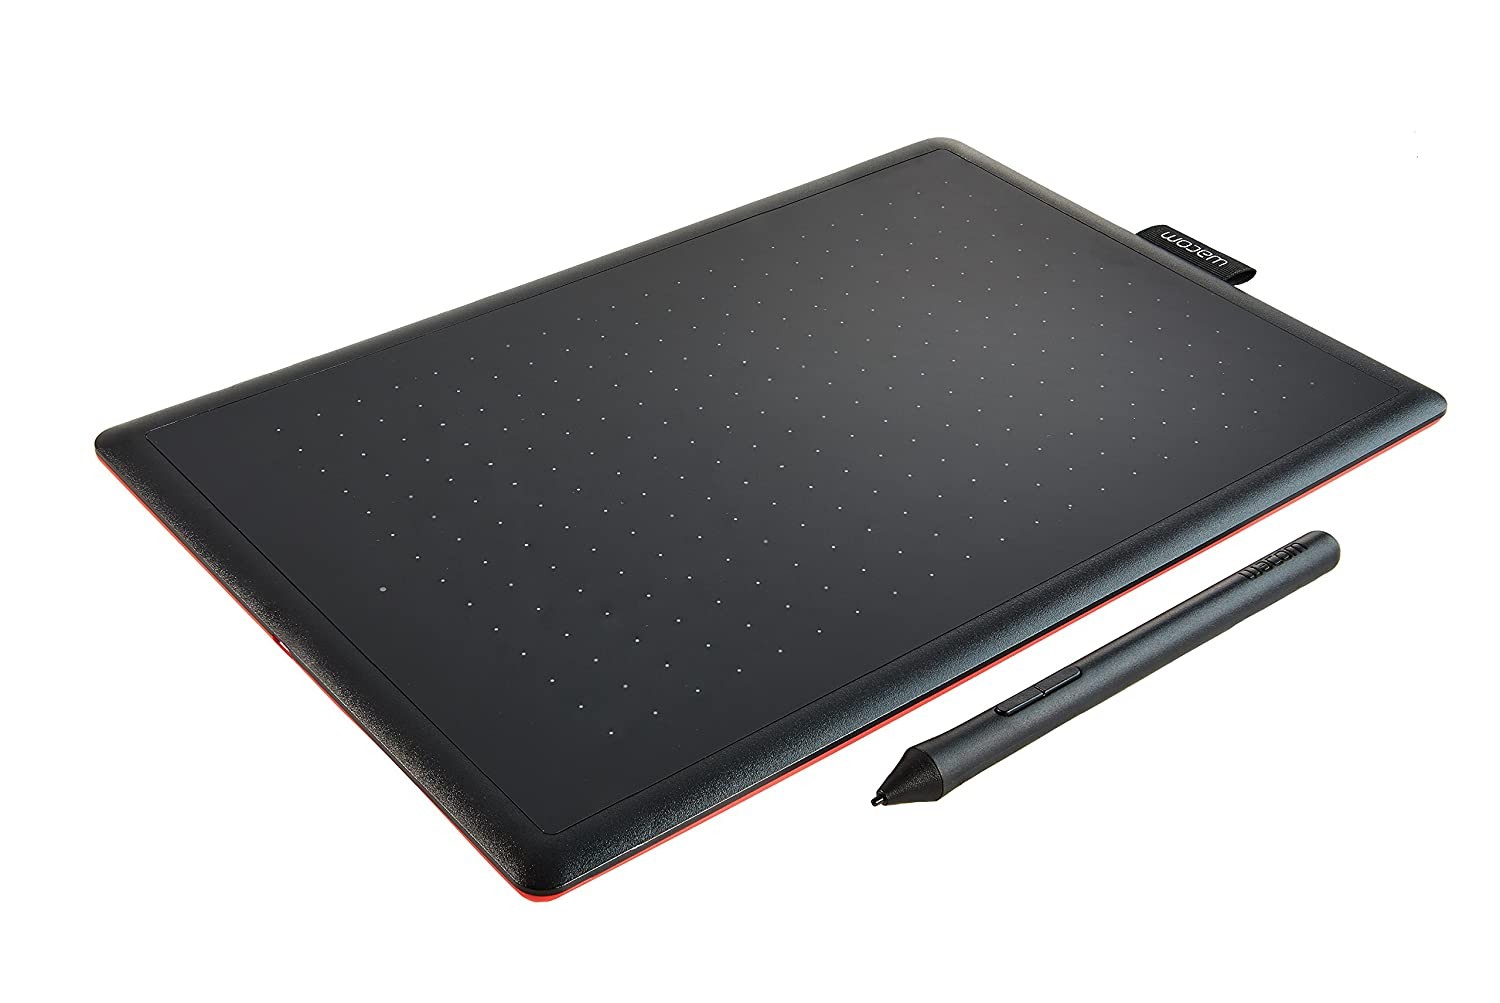 WACOM One by CTL-672/K0-CX Medium 8.5-inch x 5.3-inch Graphic Tablet (Red and Black)